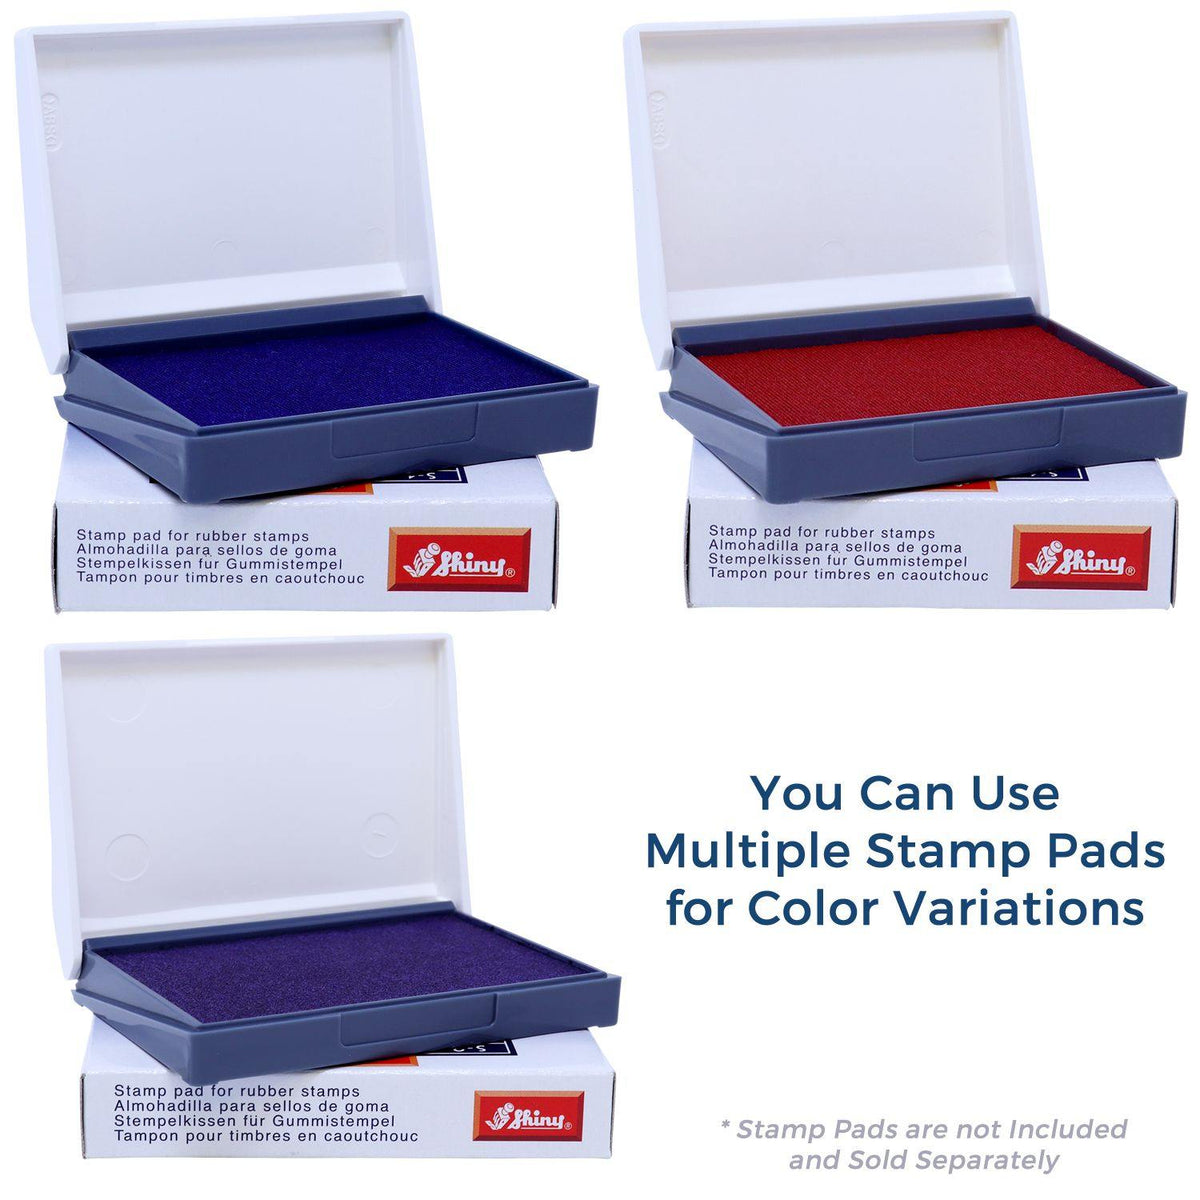 Stamp Pads for Large Economy Rate Rubber Stamp Available